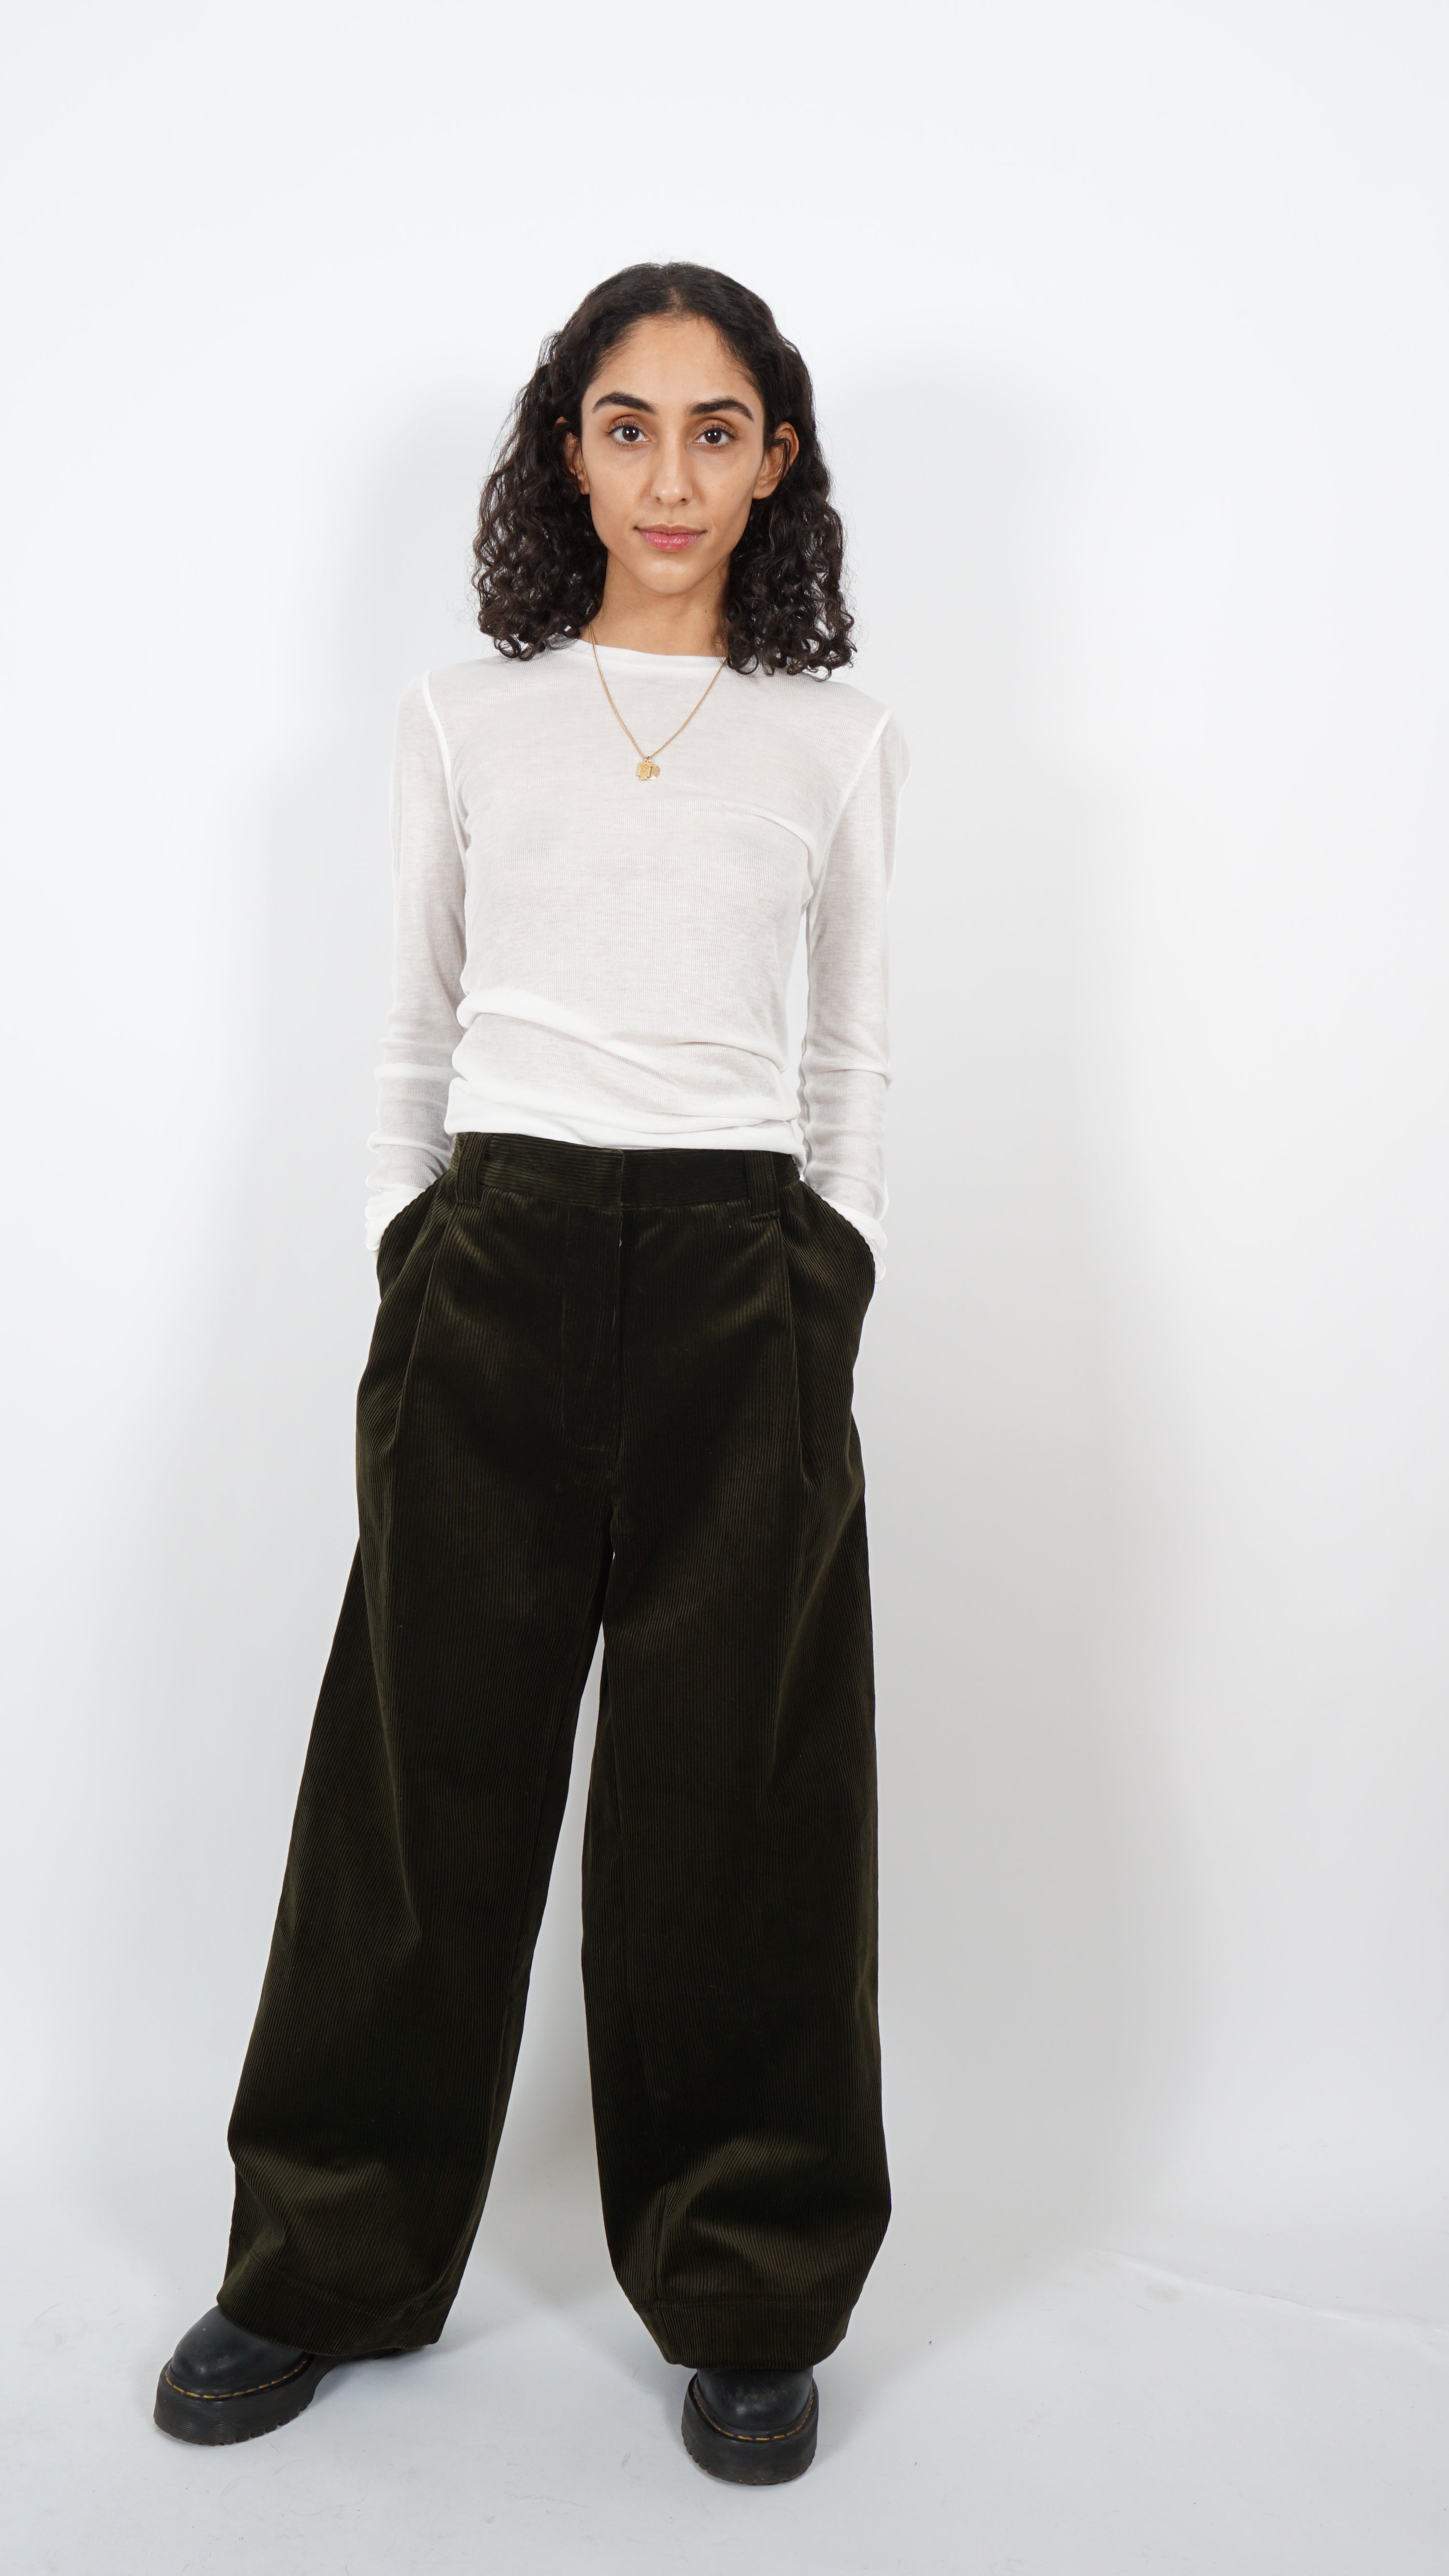 Corduroy trouser by Maria Holm Skow